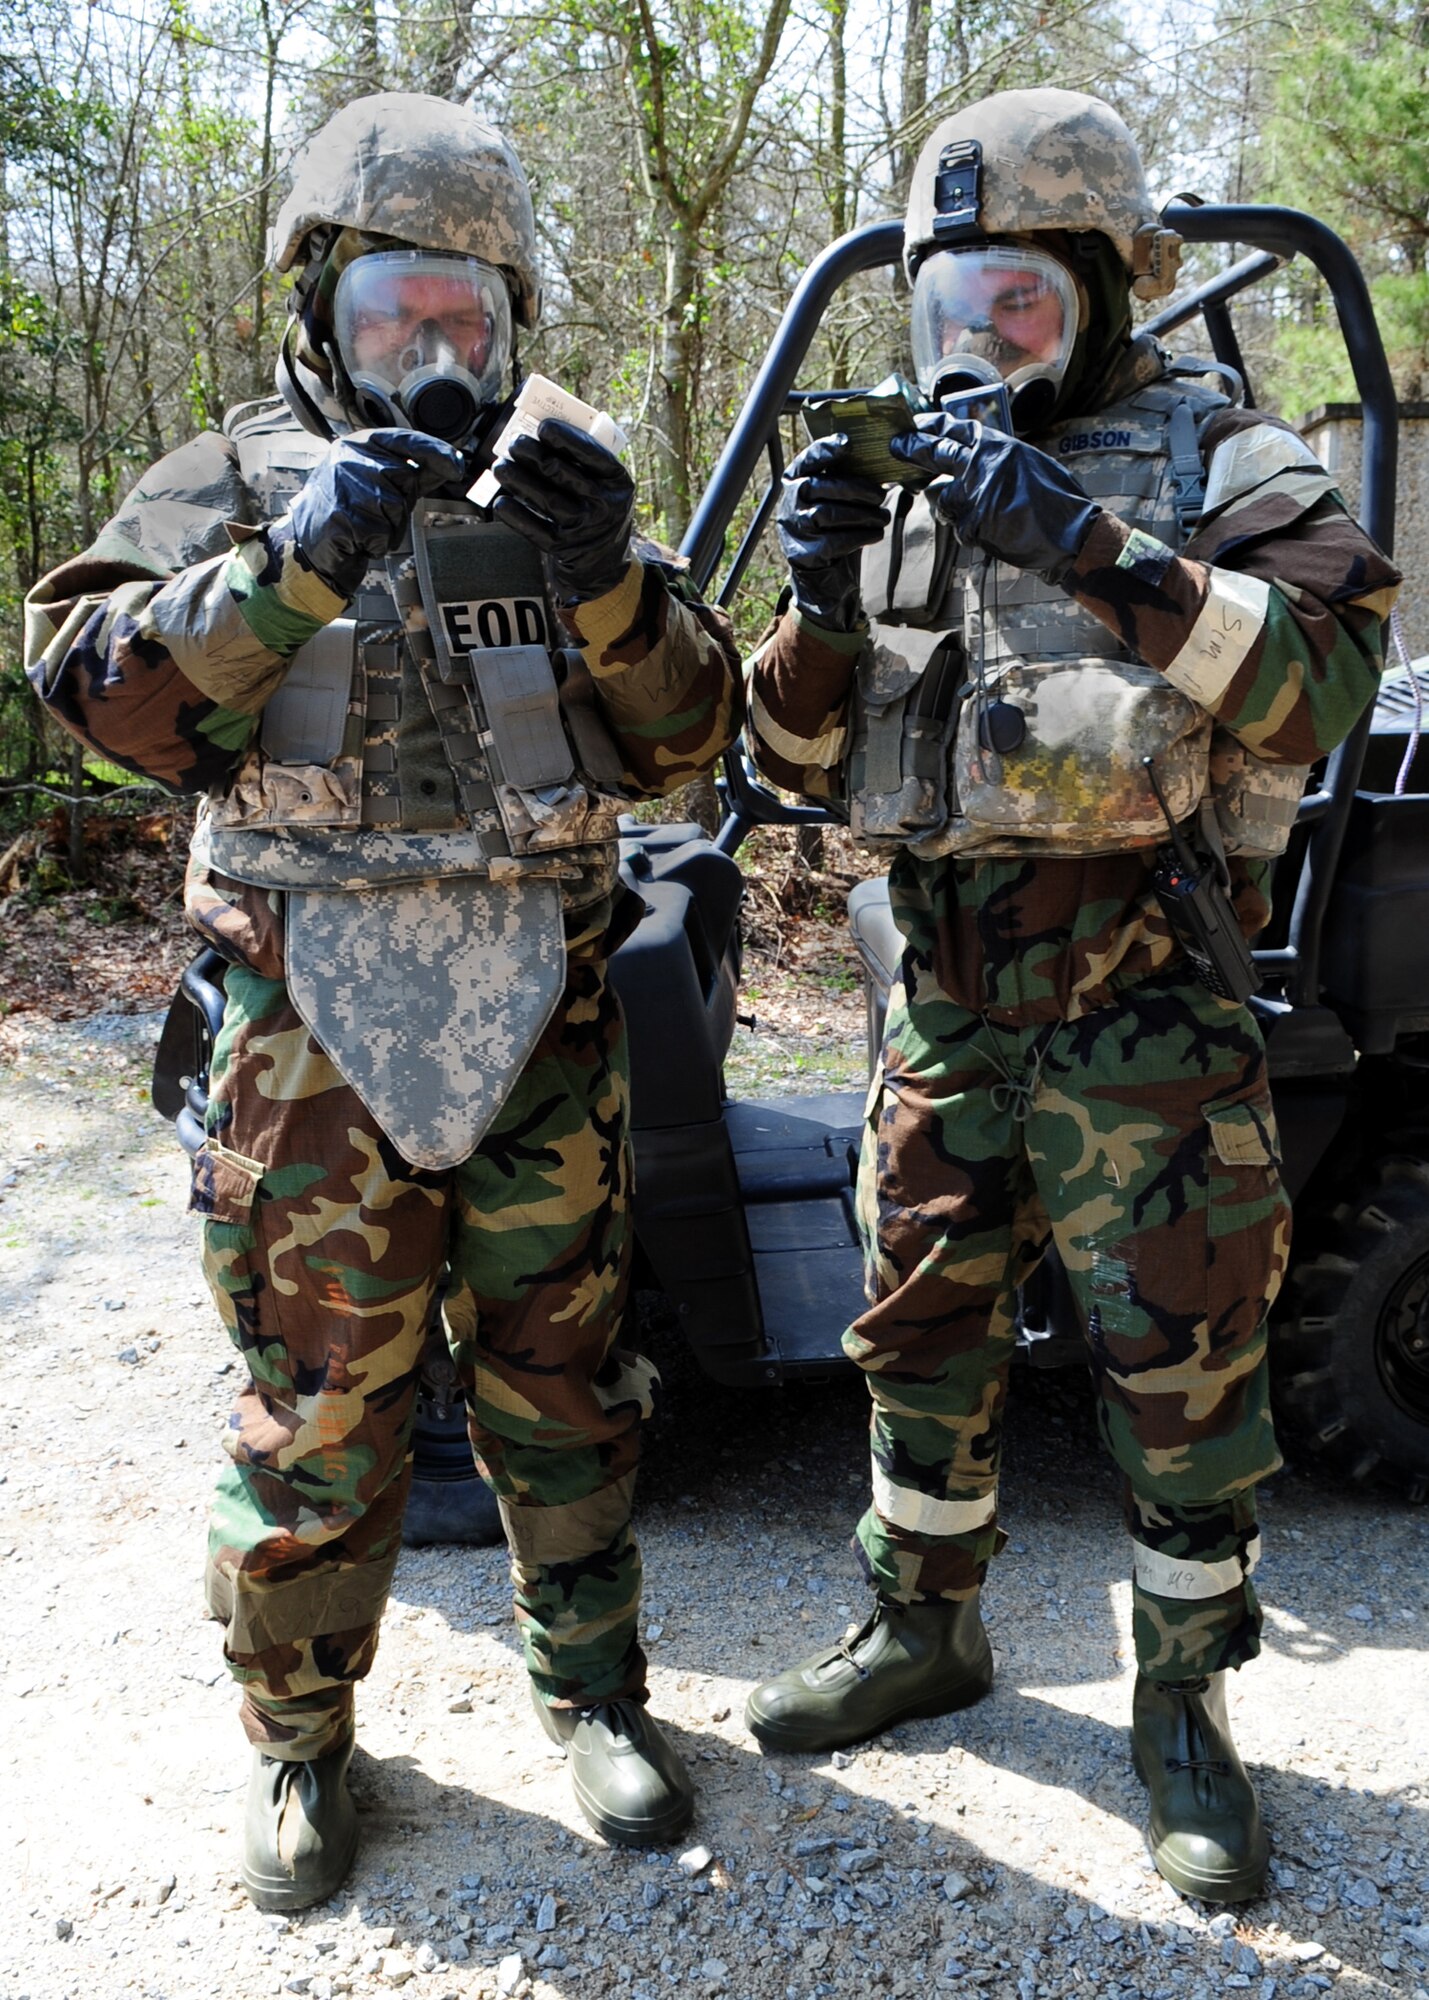 Airman 1st Class Brandon Martin and Senior Airman Cooper Gibson, 4th Civil Engineer Squadron explosive ordnance disposal specialists, test themselves for the presence of chemical agents during a training exercise at Seymour Johnson Air Force Base, N.C., March 19, 2009. The Airmen conduct exercises to stay sharp for deployments. Chemical agents can cause a variety of symptoms including: sever skin irritation, itching, blindness, flu-like symptoms, coughing and choking. (U.S. Air Force Photo by Airman 1st Class Rae Perry)